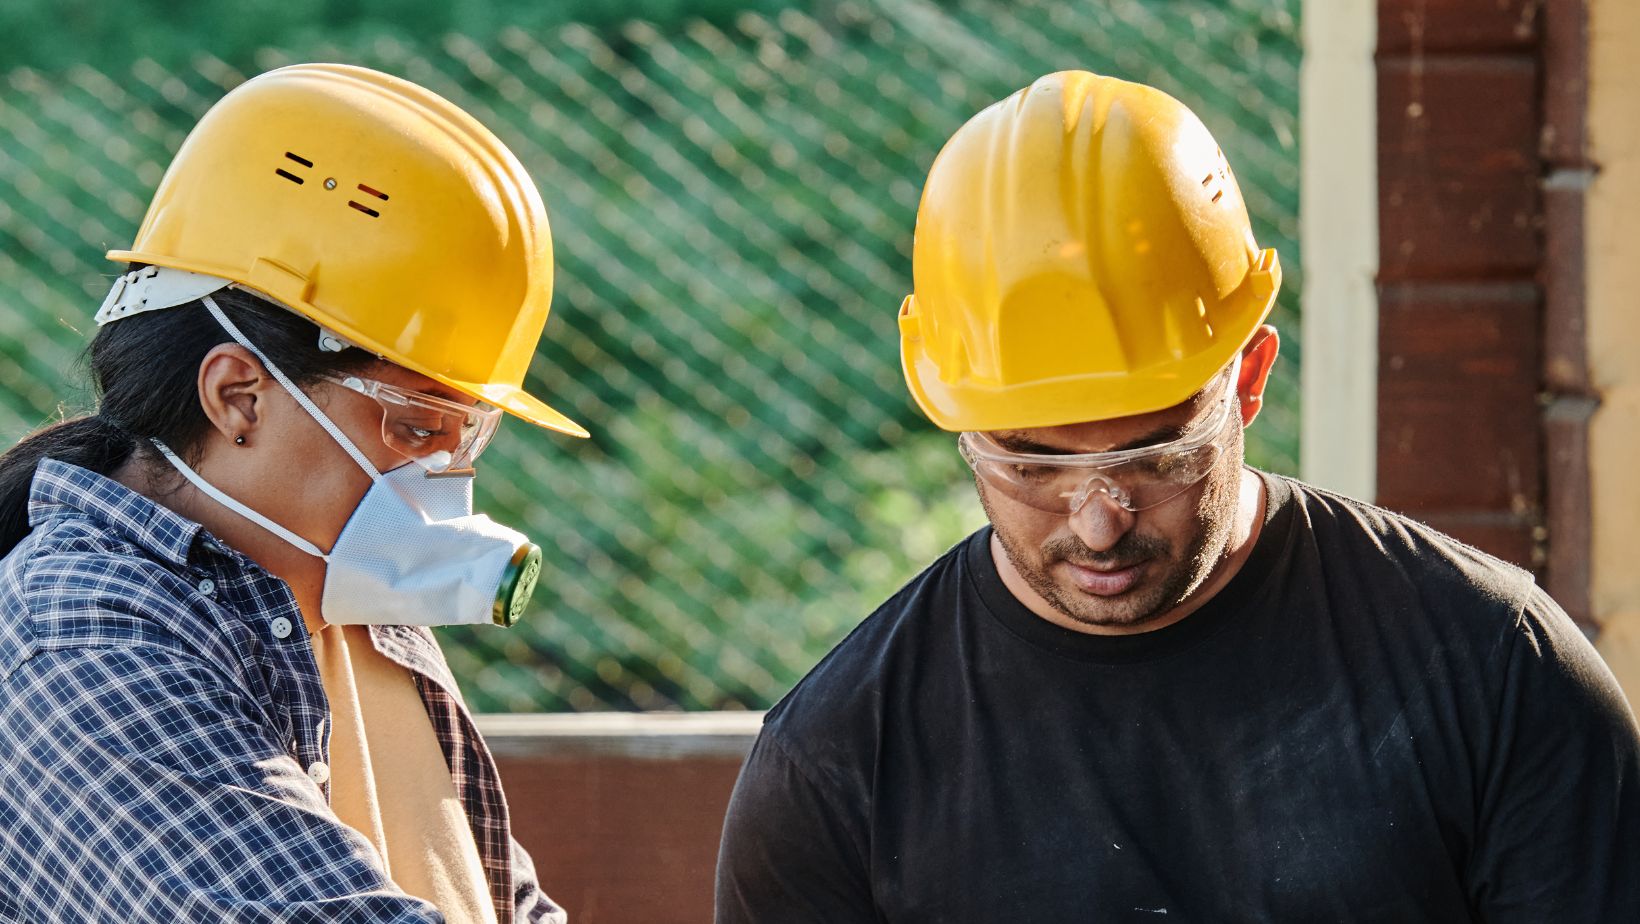 Man and woman wearing head PPE